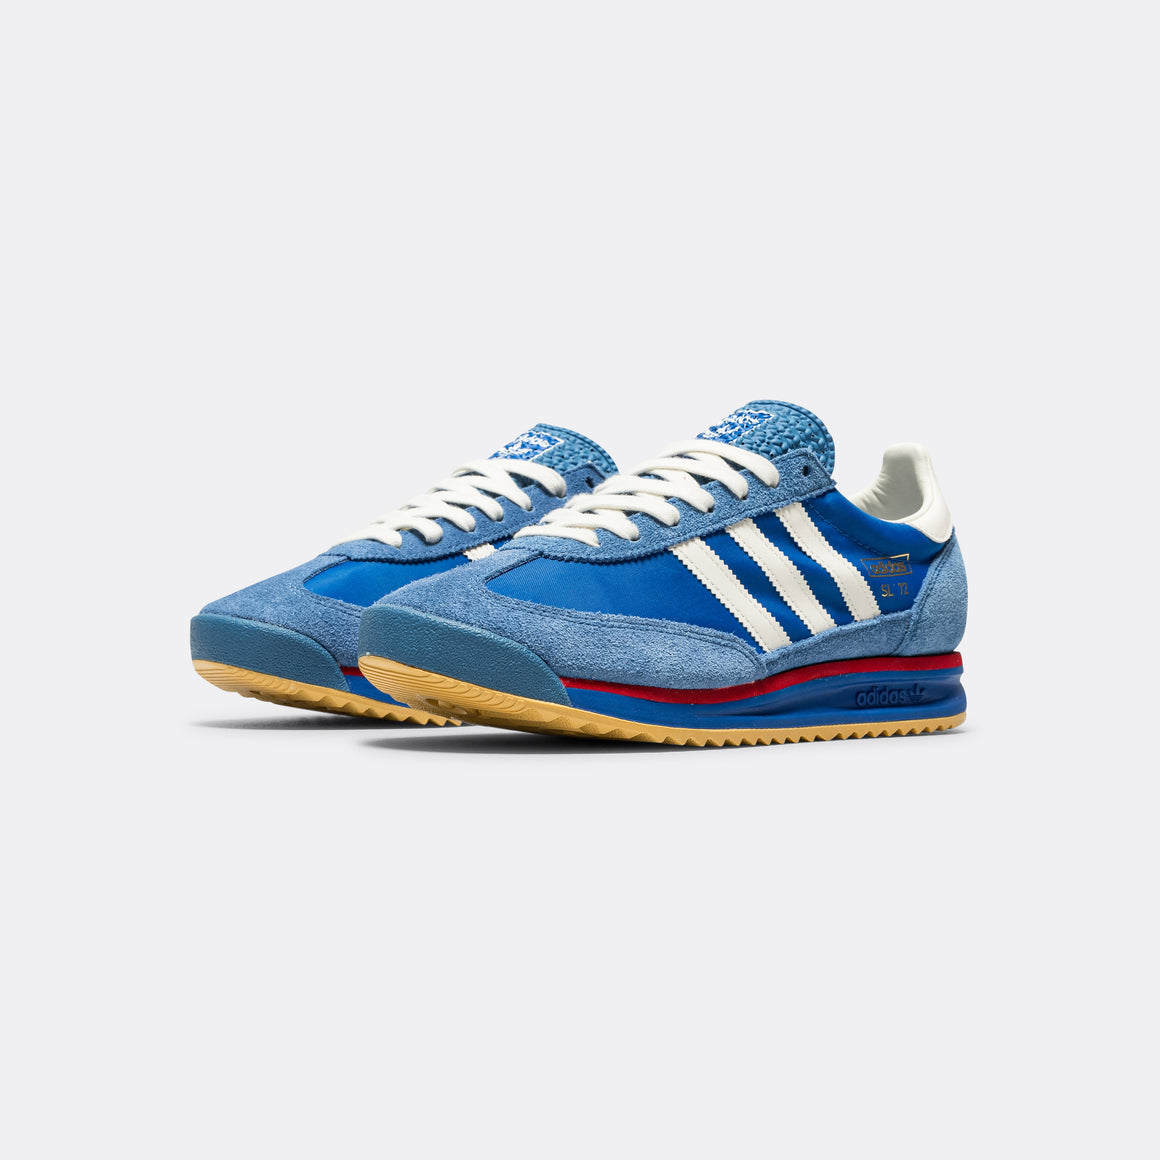 adidas - SL 72 RS - Blue/Core White-Better Scarlet - UP THERE